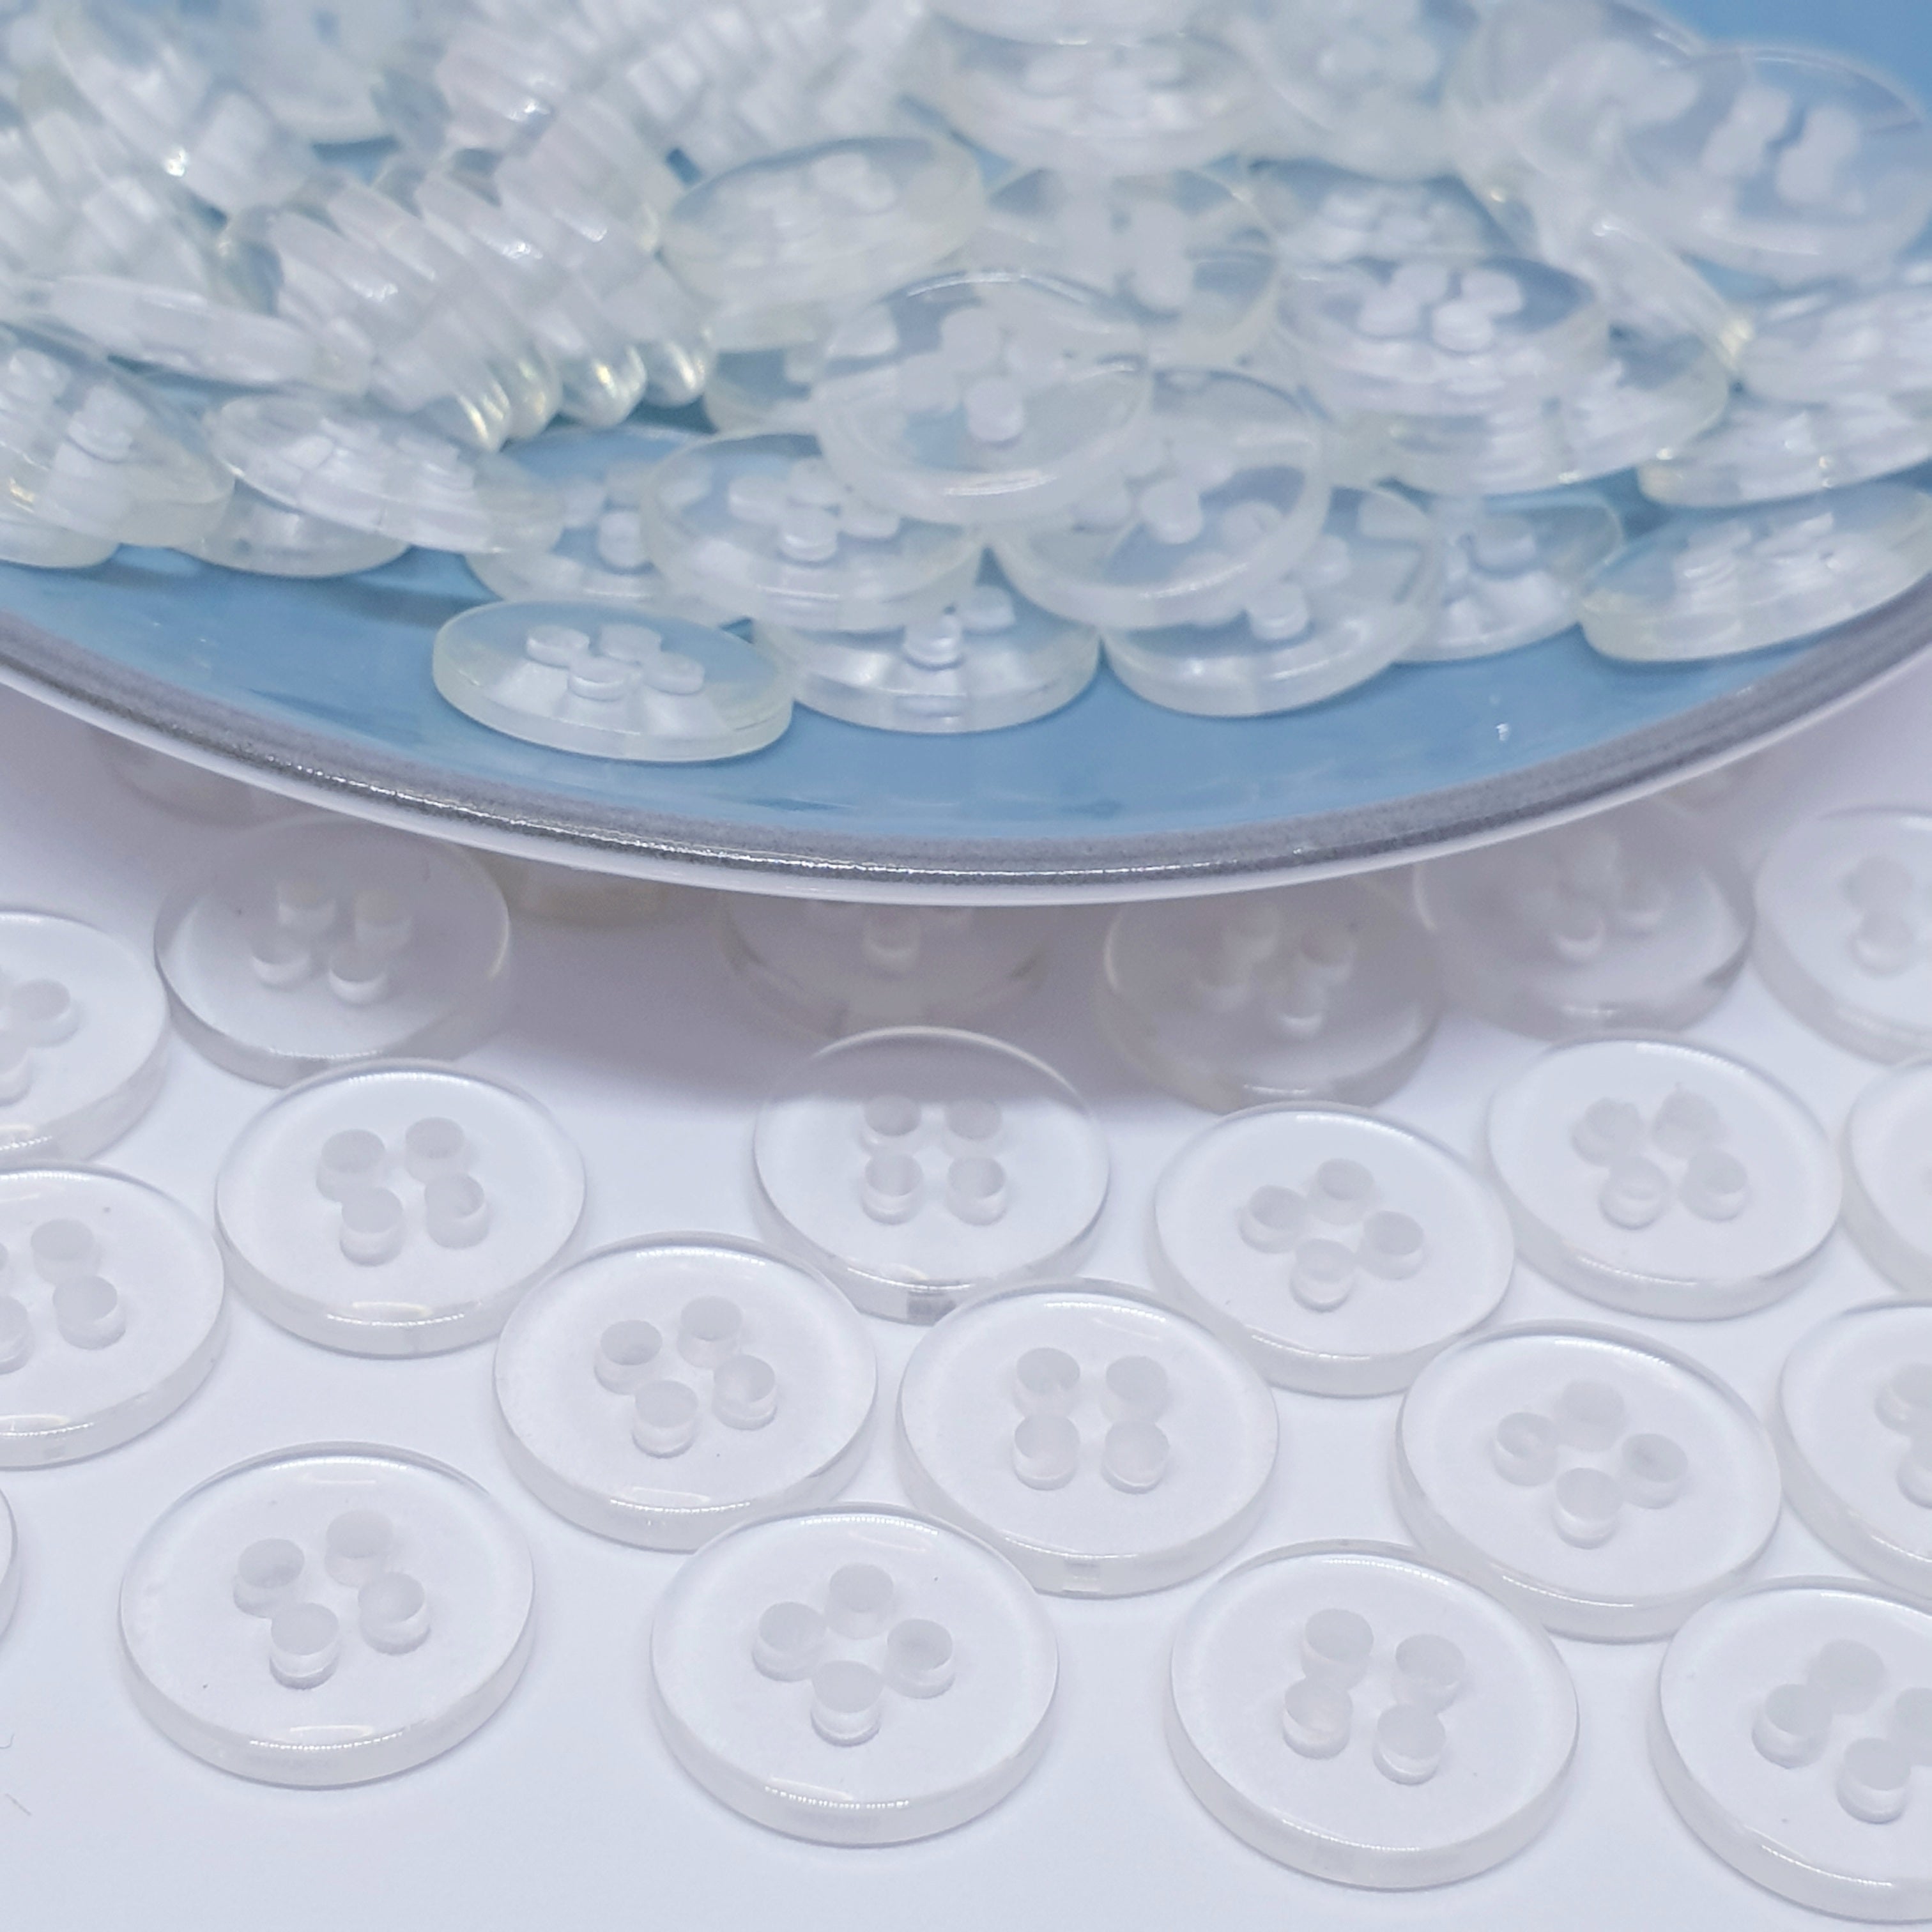 MajorCrafts 100pcs 12.5mm Transparent Clear 4 Holes Small Round Resin Sewing Buttons